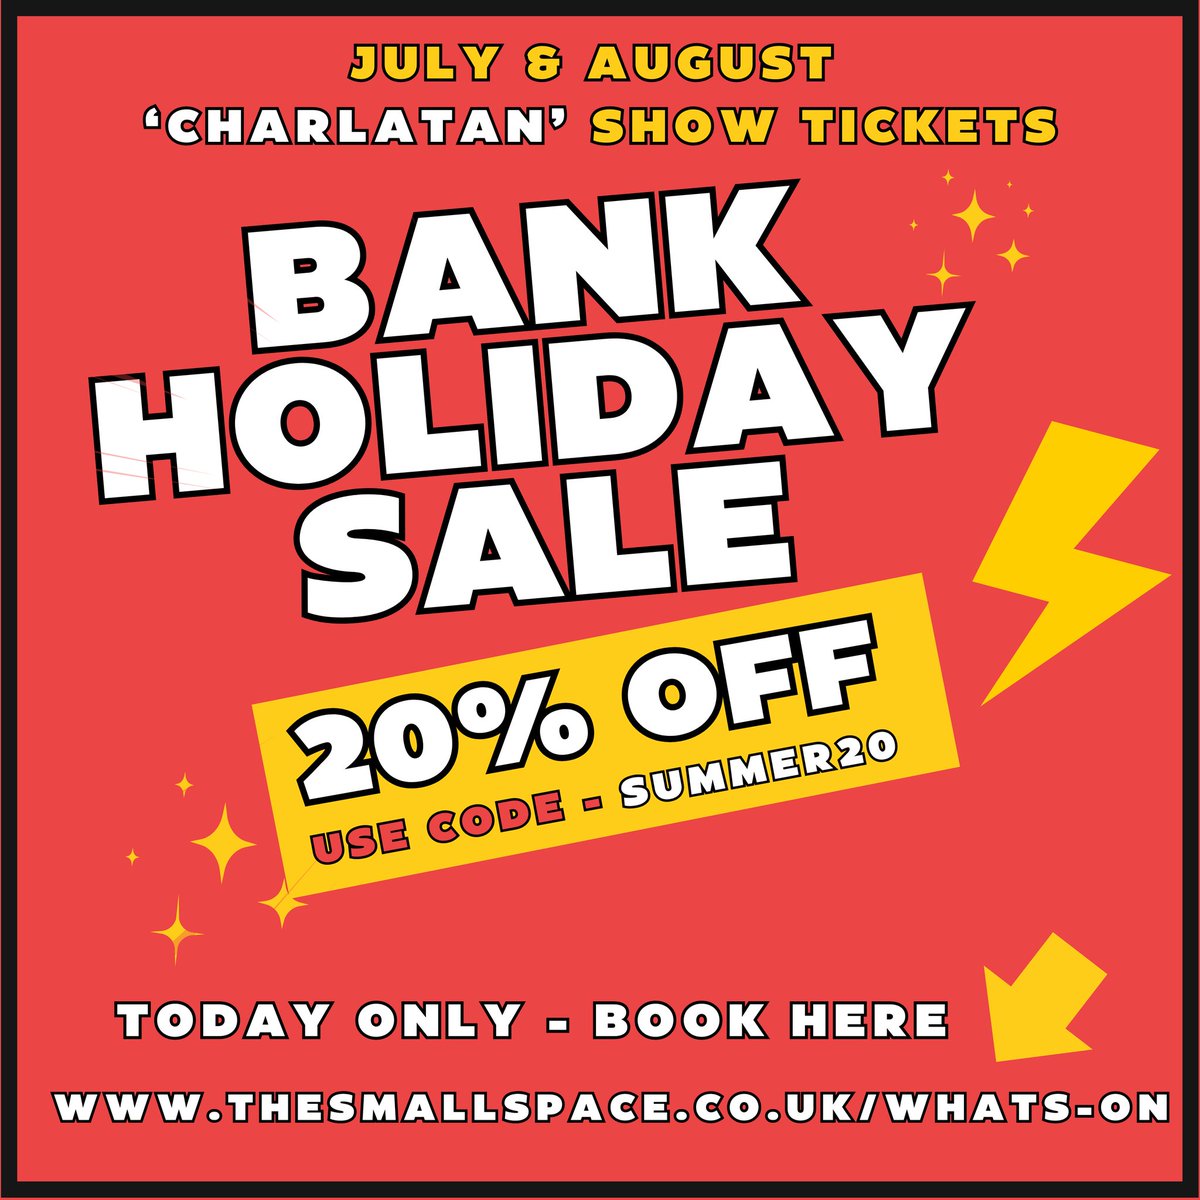 20% OFF TICKETS for July & August dates for comedy magic & mind-reading show 'CHARLATAN' use SUMMER20 code - ends 23.55 tonight Book thesmallspace.co.uk/whats-on #discounttickets #theatre #magic #comedy #liveentertainment #Barry #cardiff #whatsoncardiff #supportlocal #cocktails